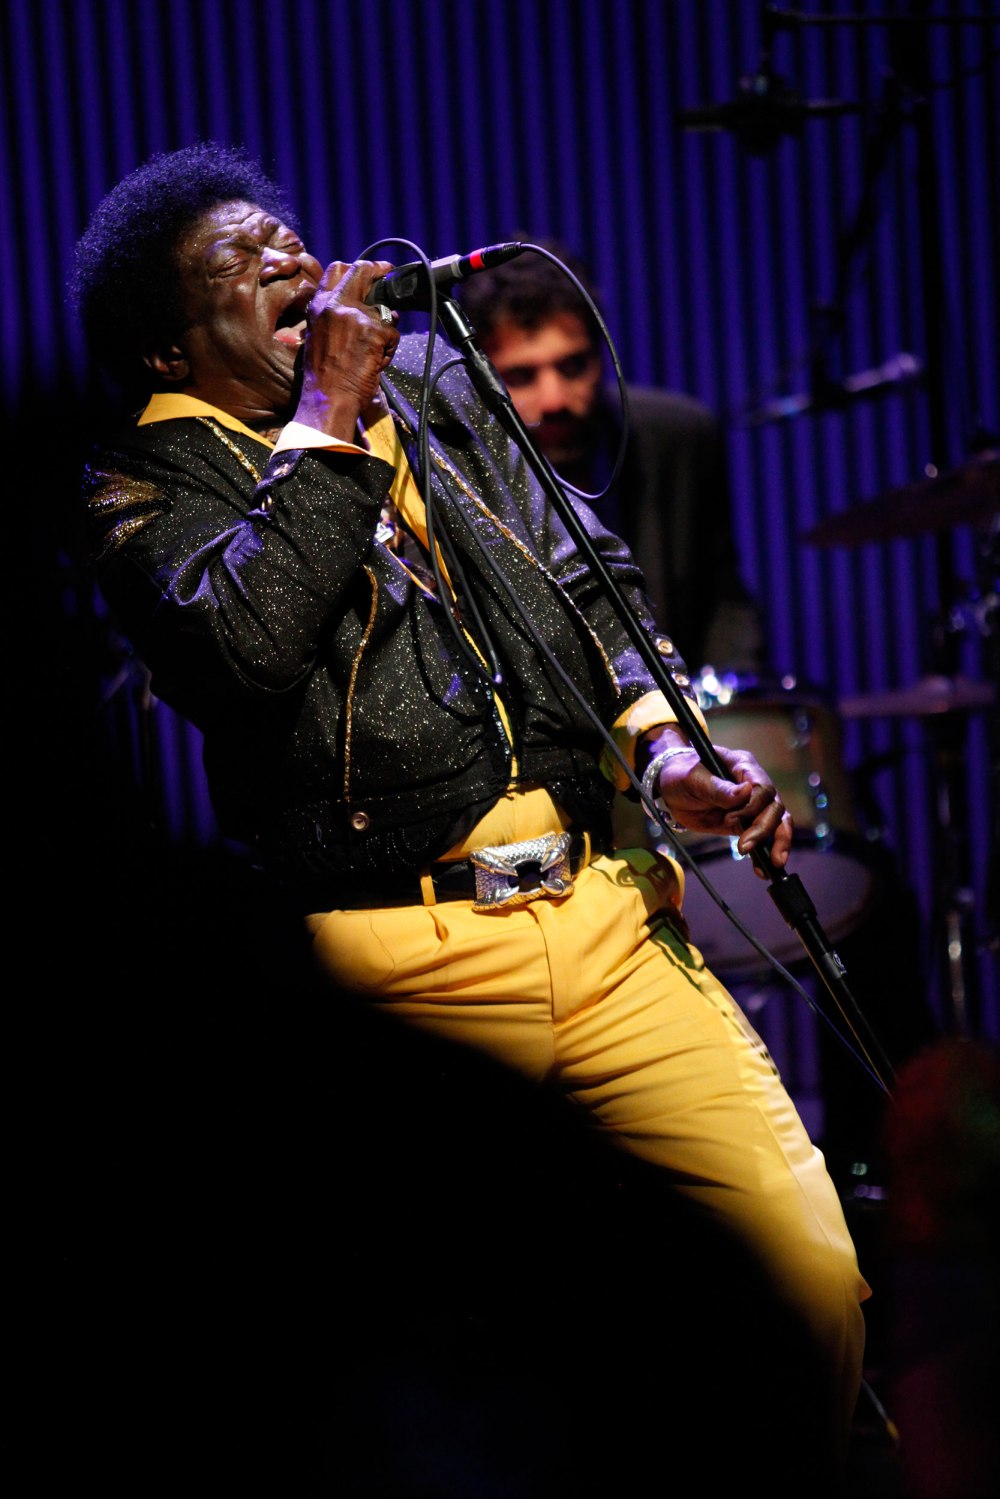 Charles Bradley performs during the SF Jazz Gala in San Francisco Calif. on Friday, May 16, 2014. Bradley, who once made a living impersonation James Brown, was recently discovered by Daptone and recorded his first album 'No Time for Dreaming' in 2011.  (Photo Copyright The San Francisco Chronicle)